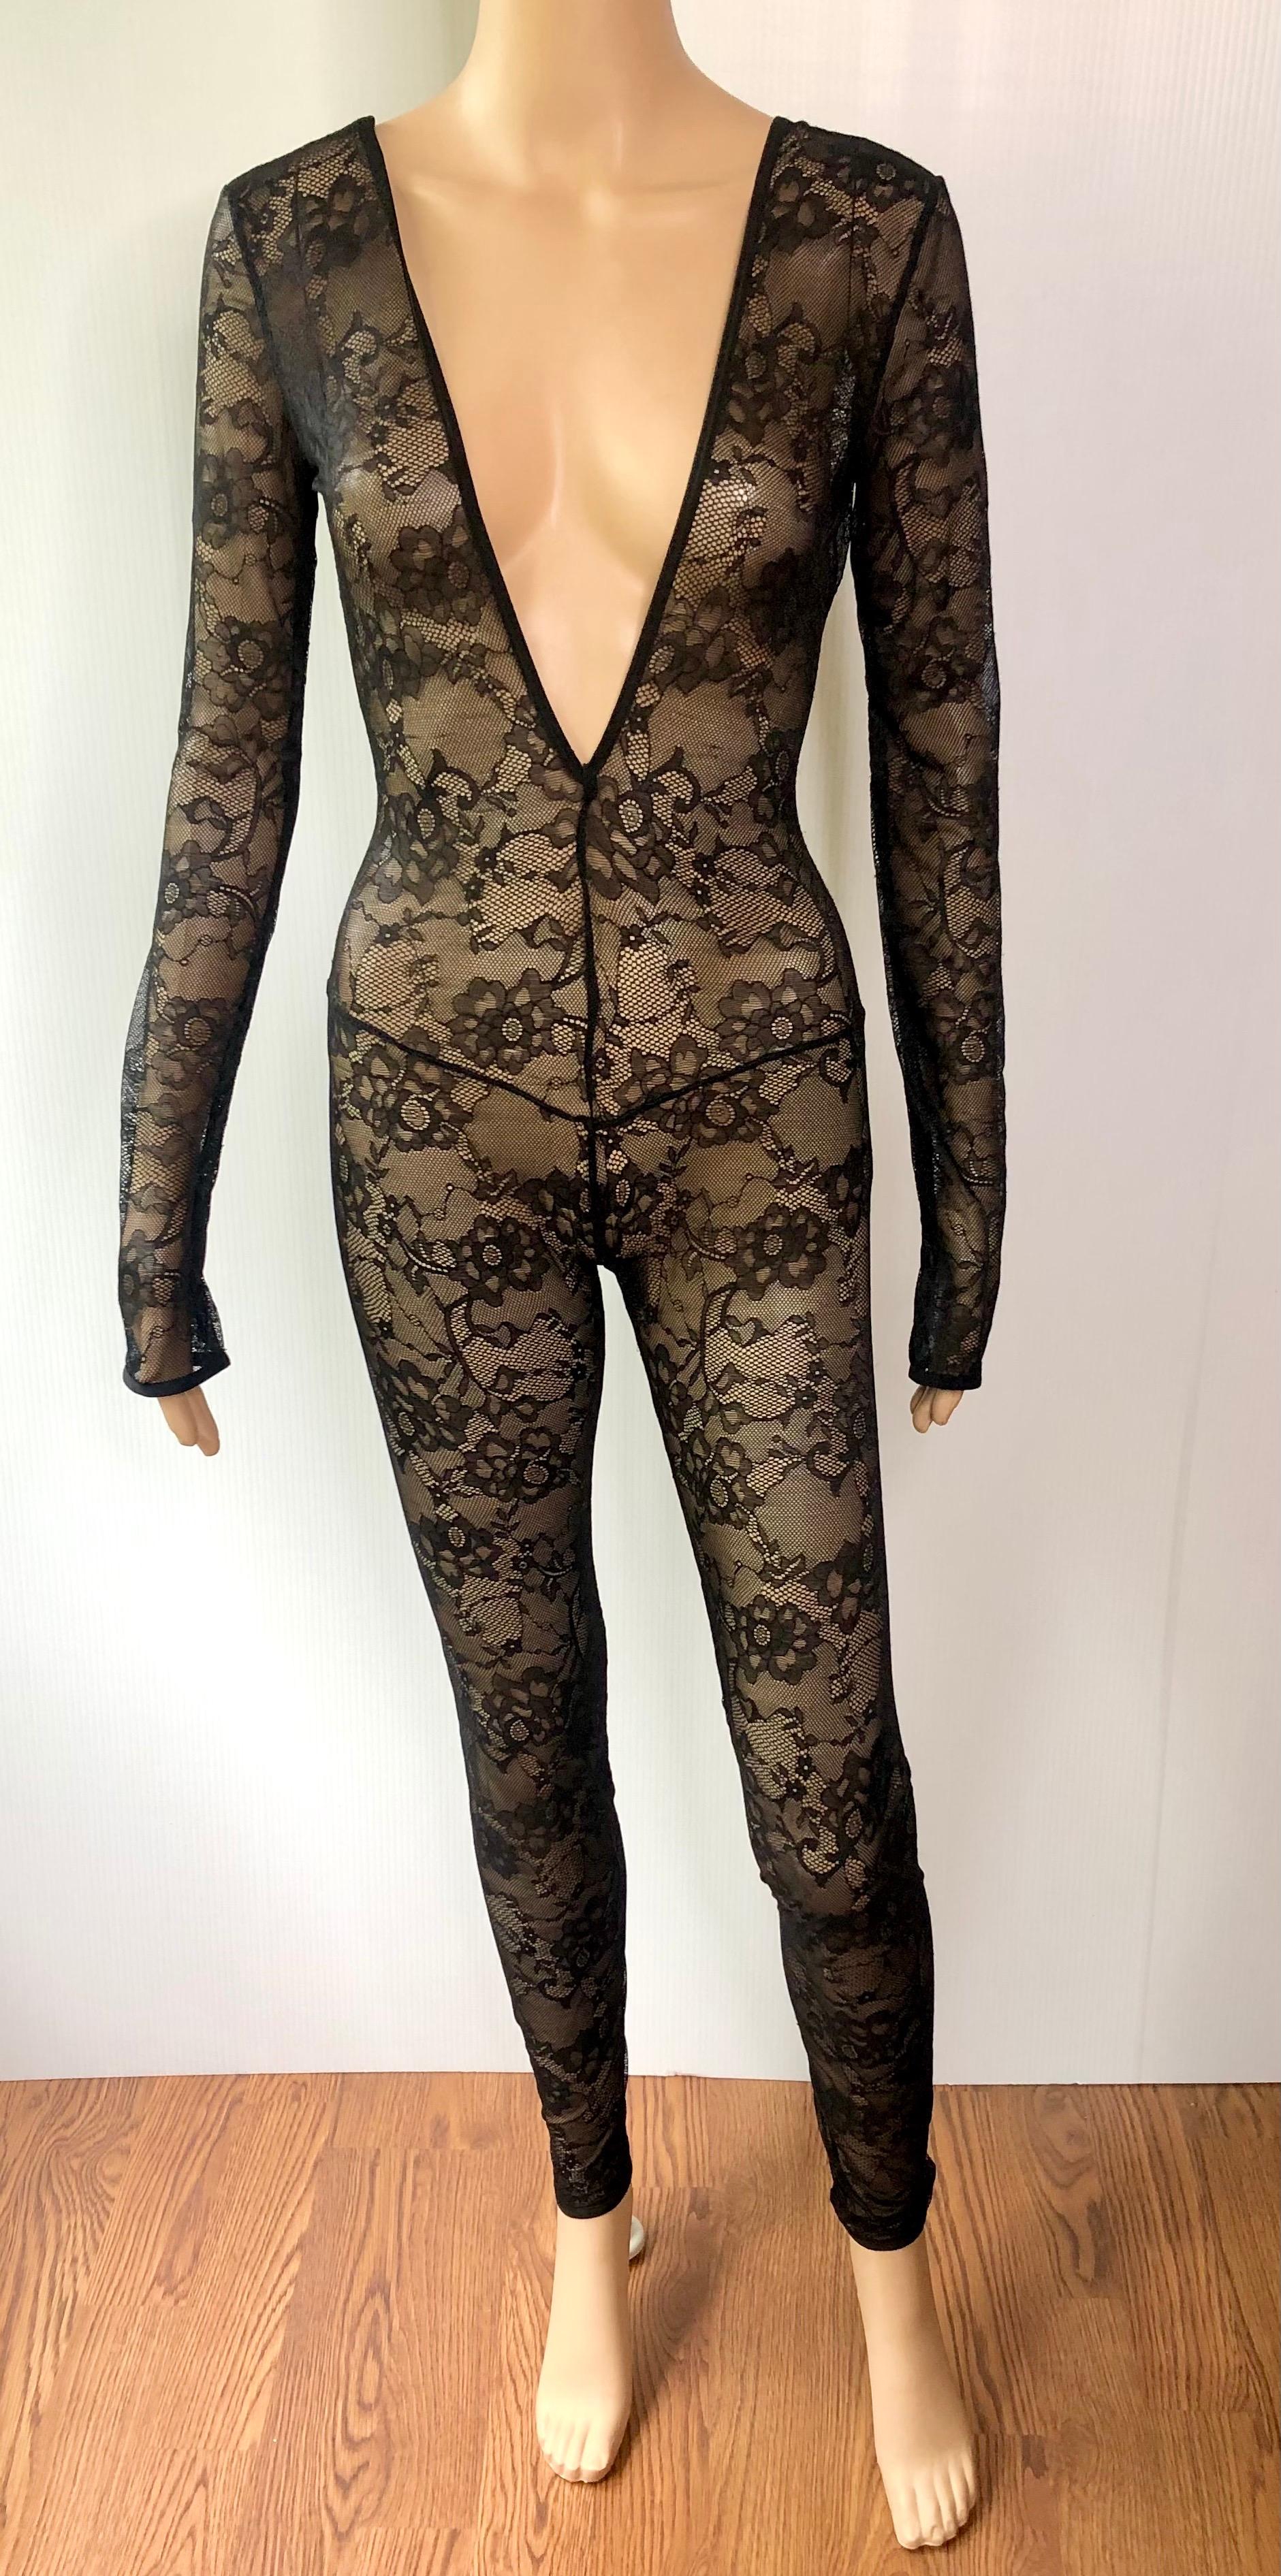 Gucci Plunging Neckline Open Back Sheer Lace Bodycon Black Playsuit Jumpsuit 2